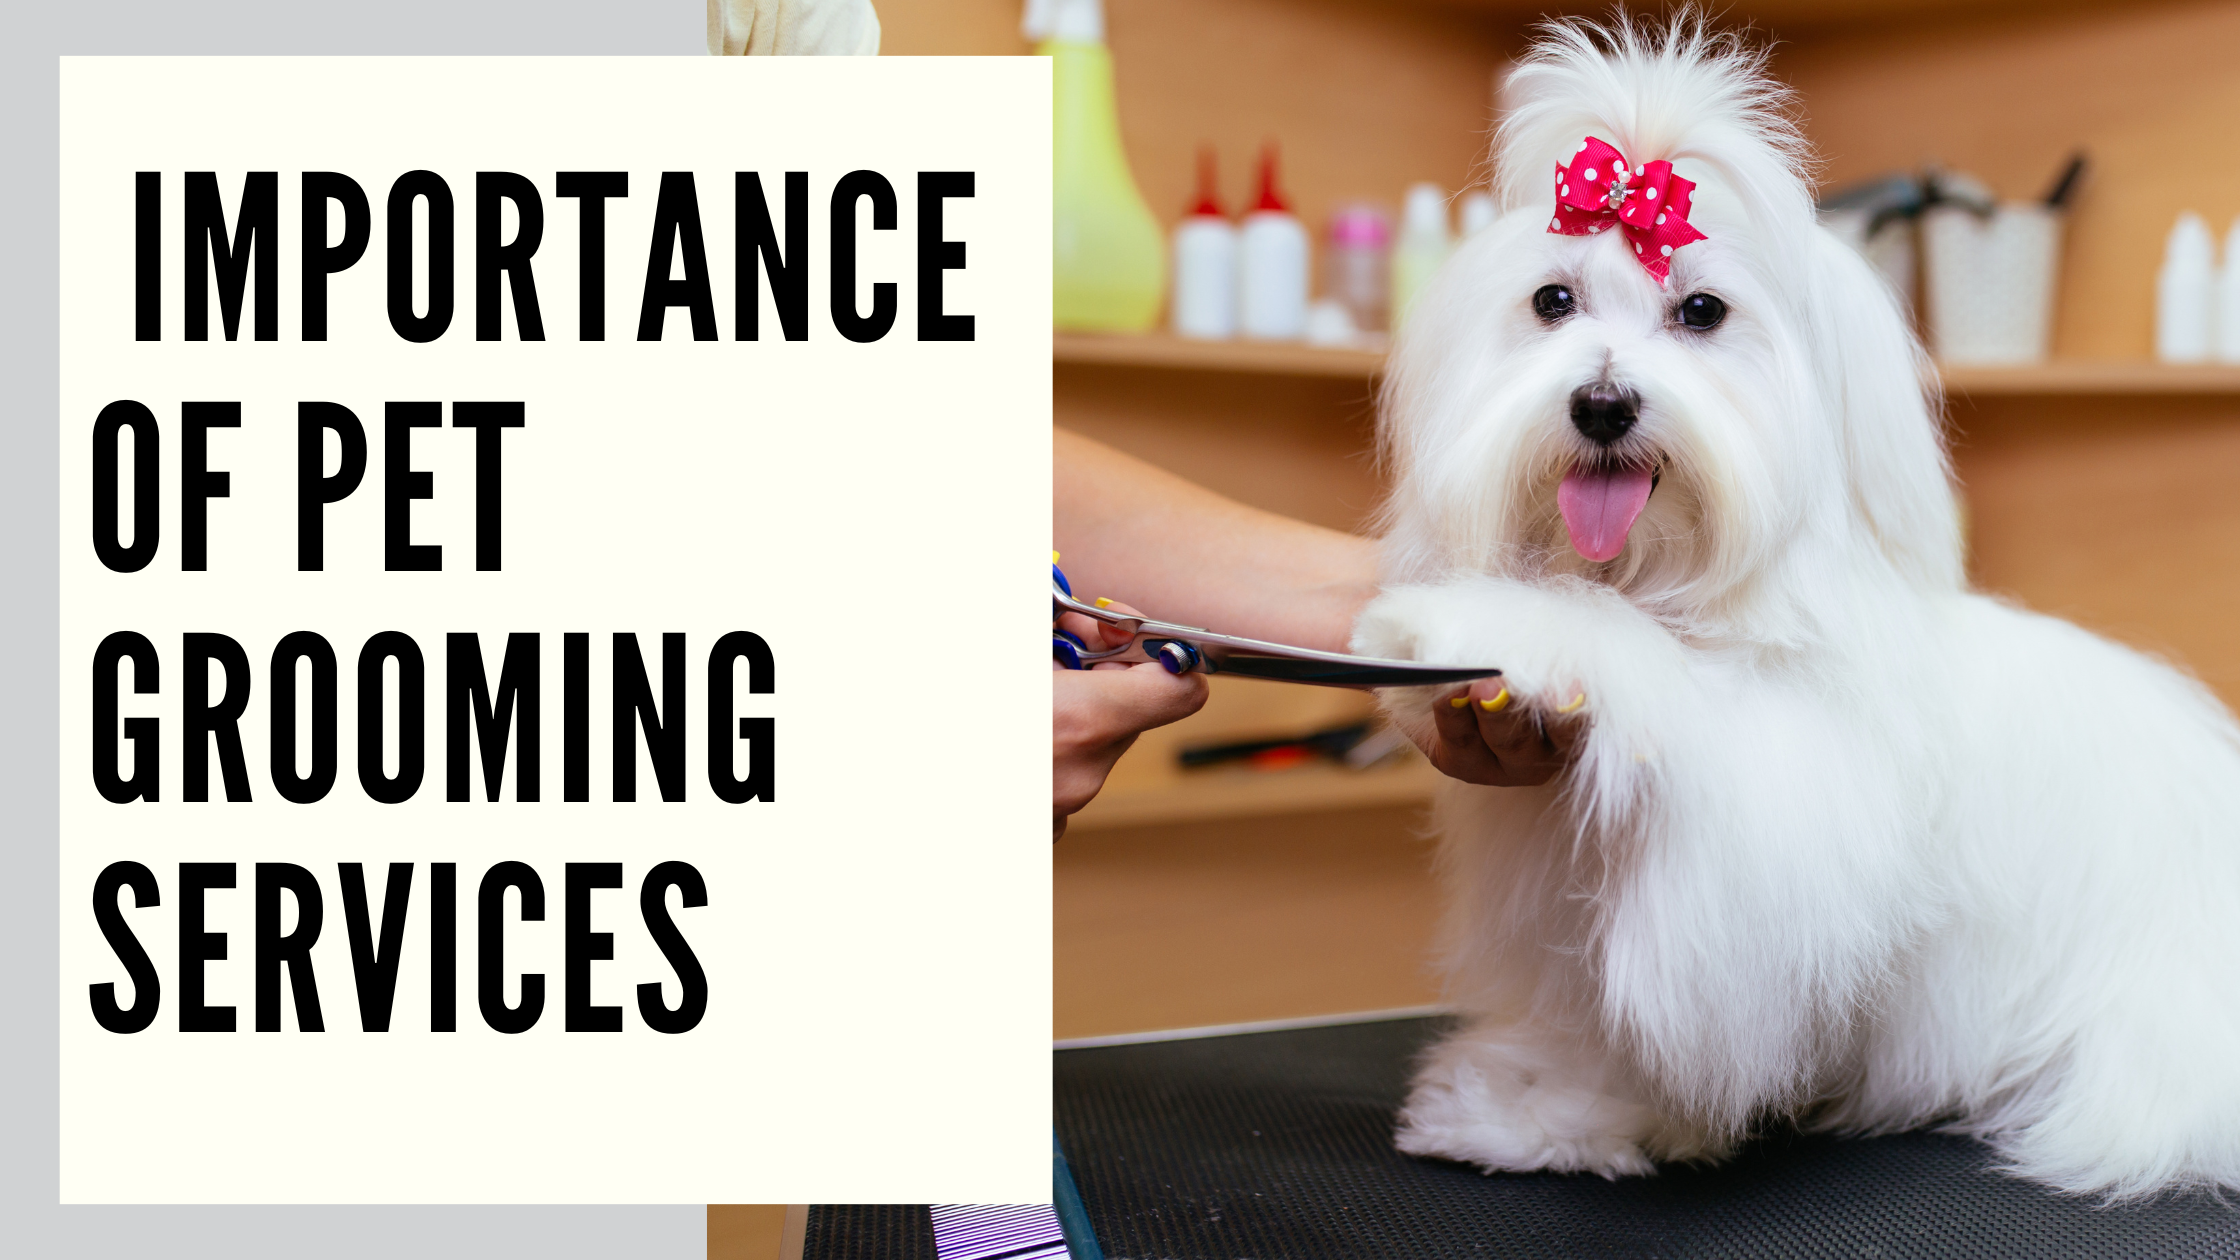 Importance of Pet Grooming Services